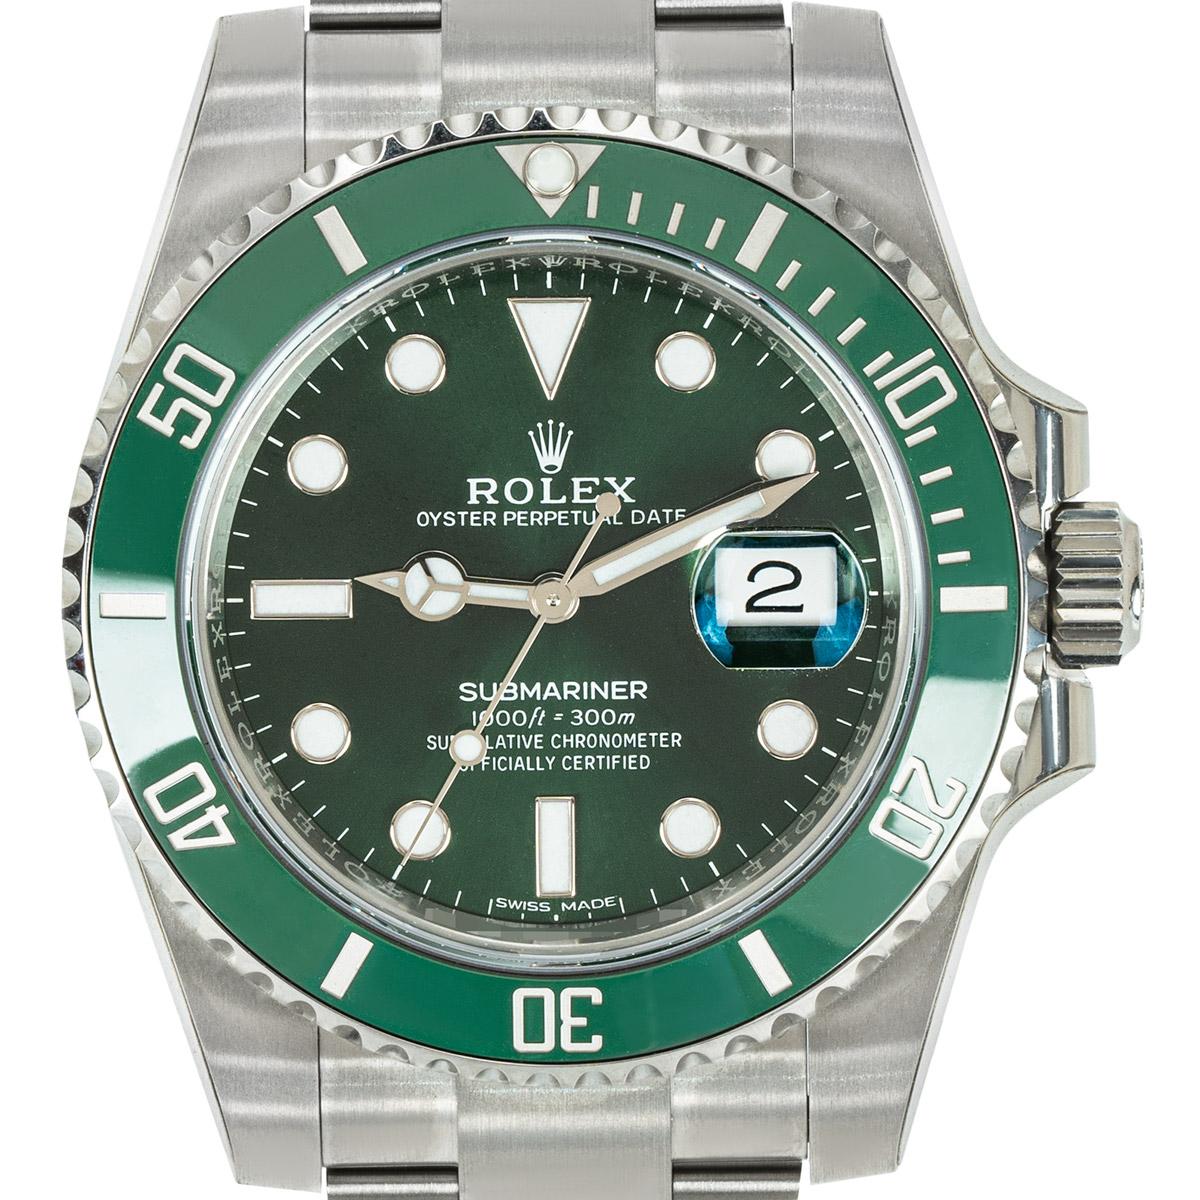 An unworn Submariner Date Hulk in Oystersteel by Rolex. Featuring a green dial and green uni-directional rotatable ceramic bezel with 60 minute graduations. The Oyster bracelet comes equipped with a folding Oysterlock clasp. Fitted with a scratch